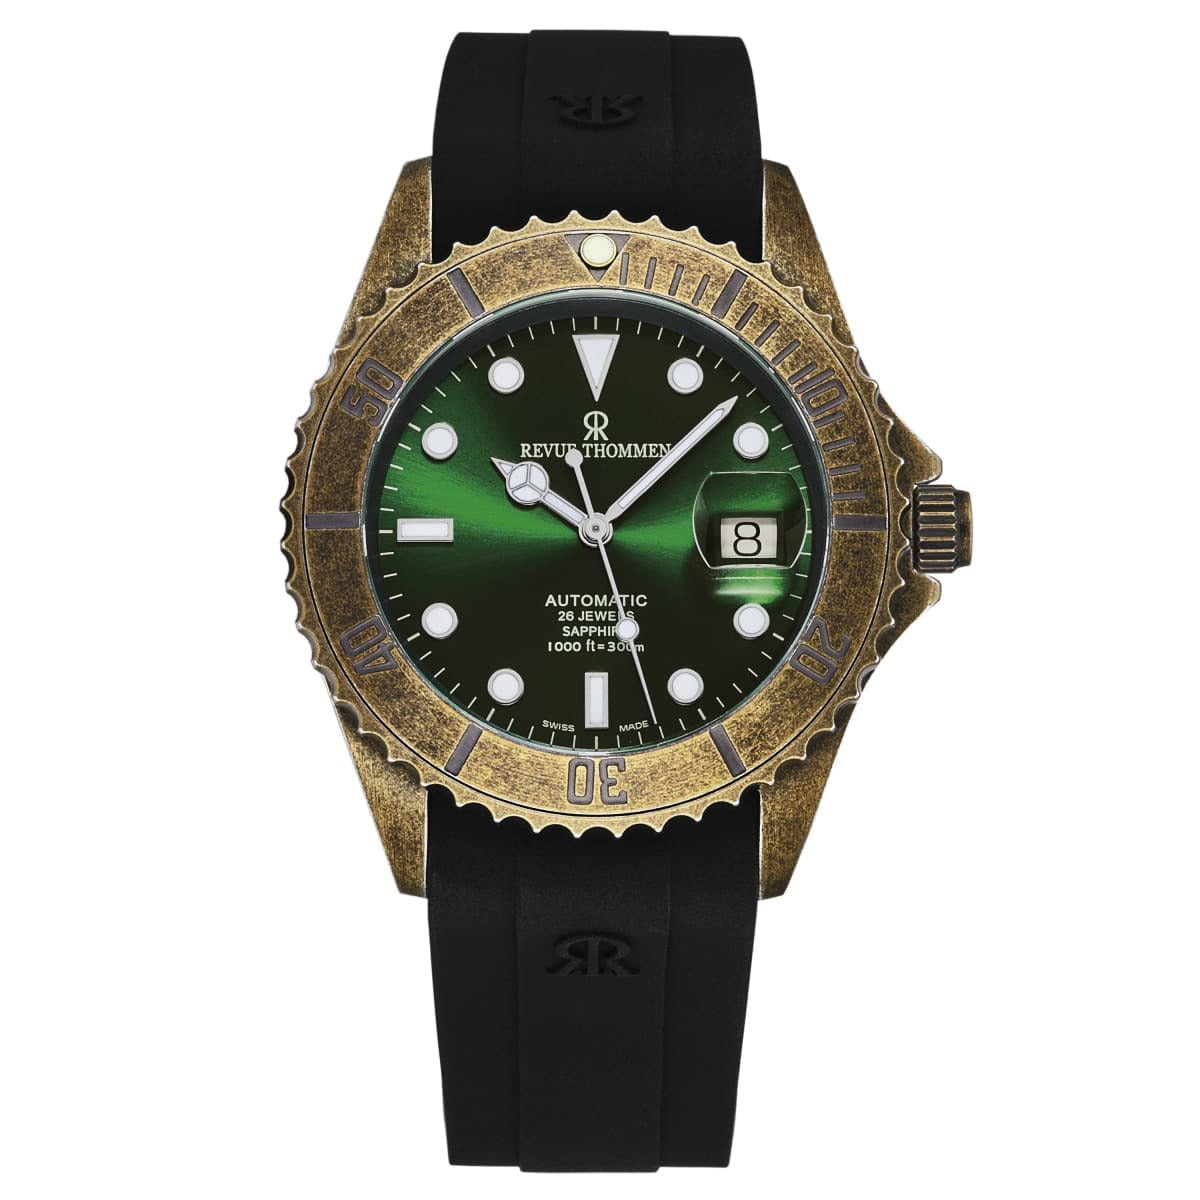 A Revue Thommen Men's 'Diver' Green Dial Black Rubber Gunmetal Automatic Watch 17571.2884 with a green dial and black strap, featuring automatic movement.